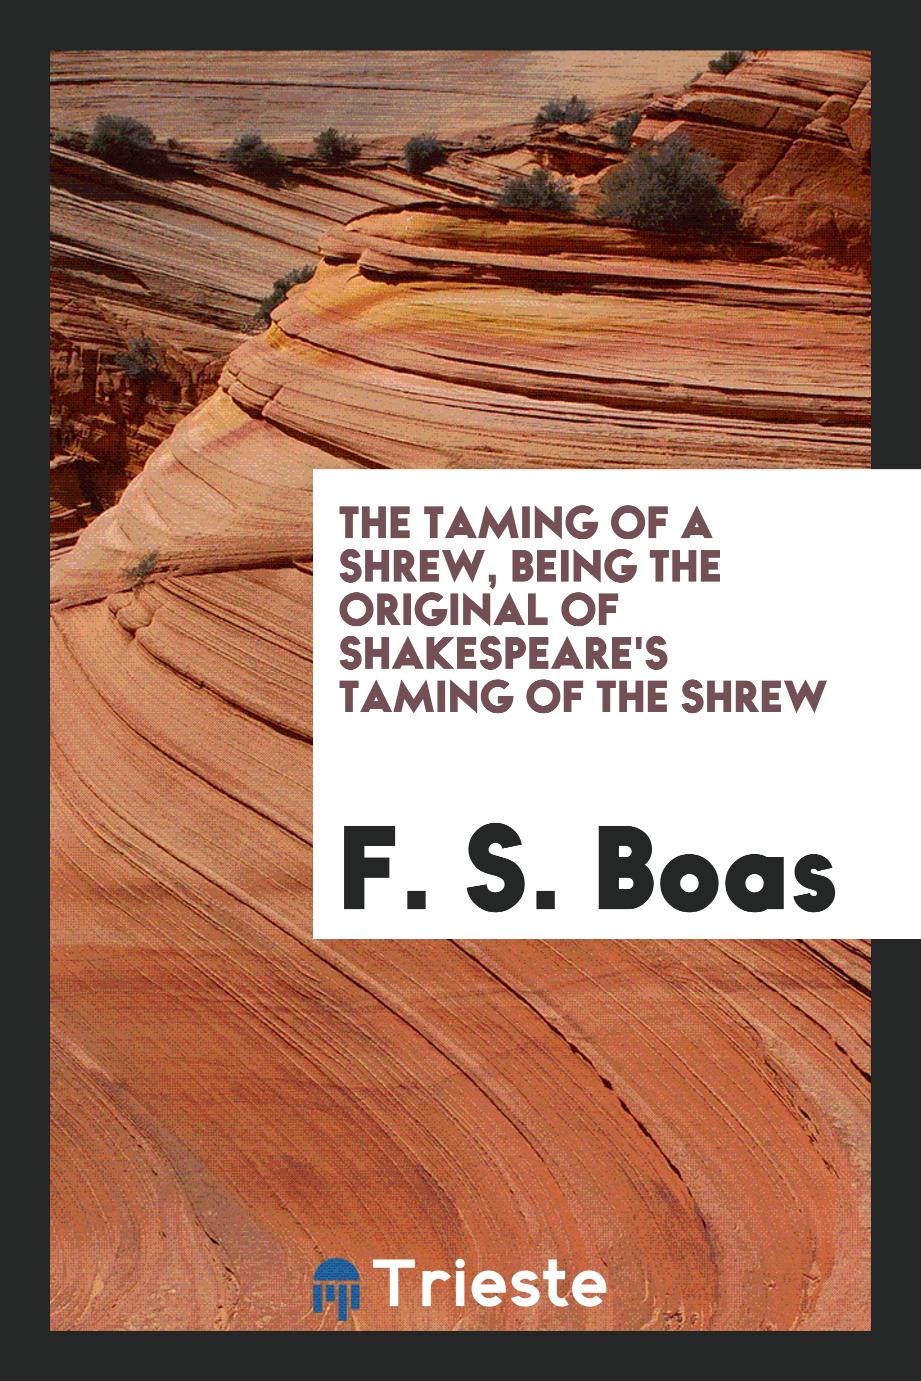 F. S. Boas - The taming of a shrew, being the original of Shakespeare's Taming of the shrew